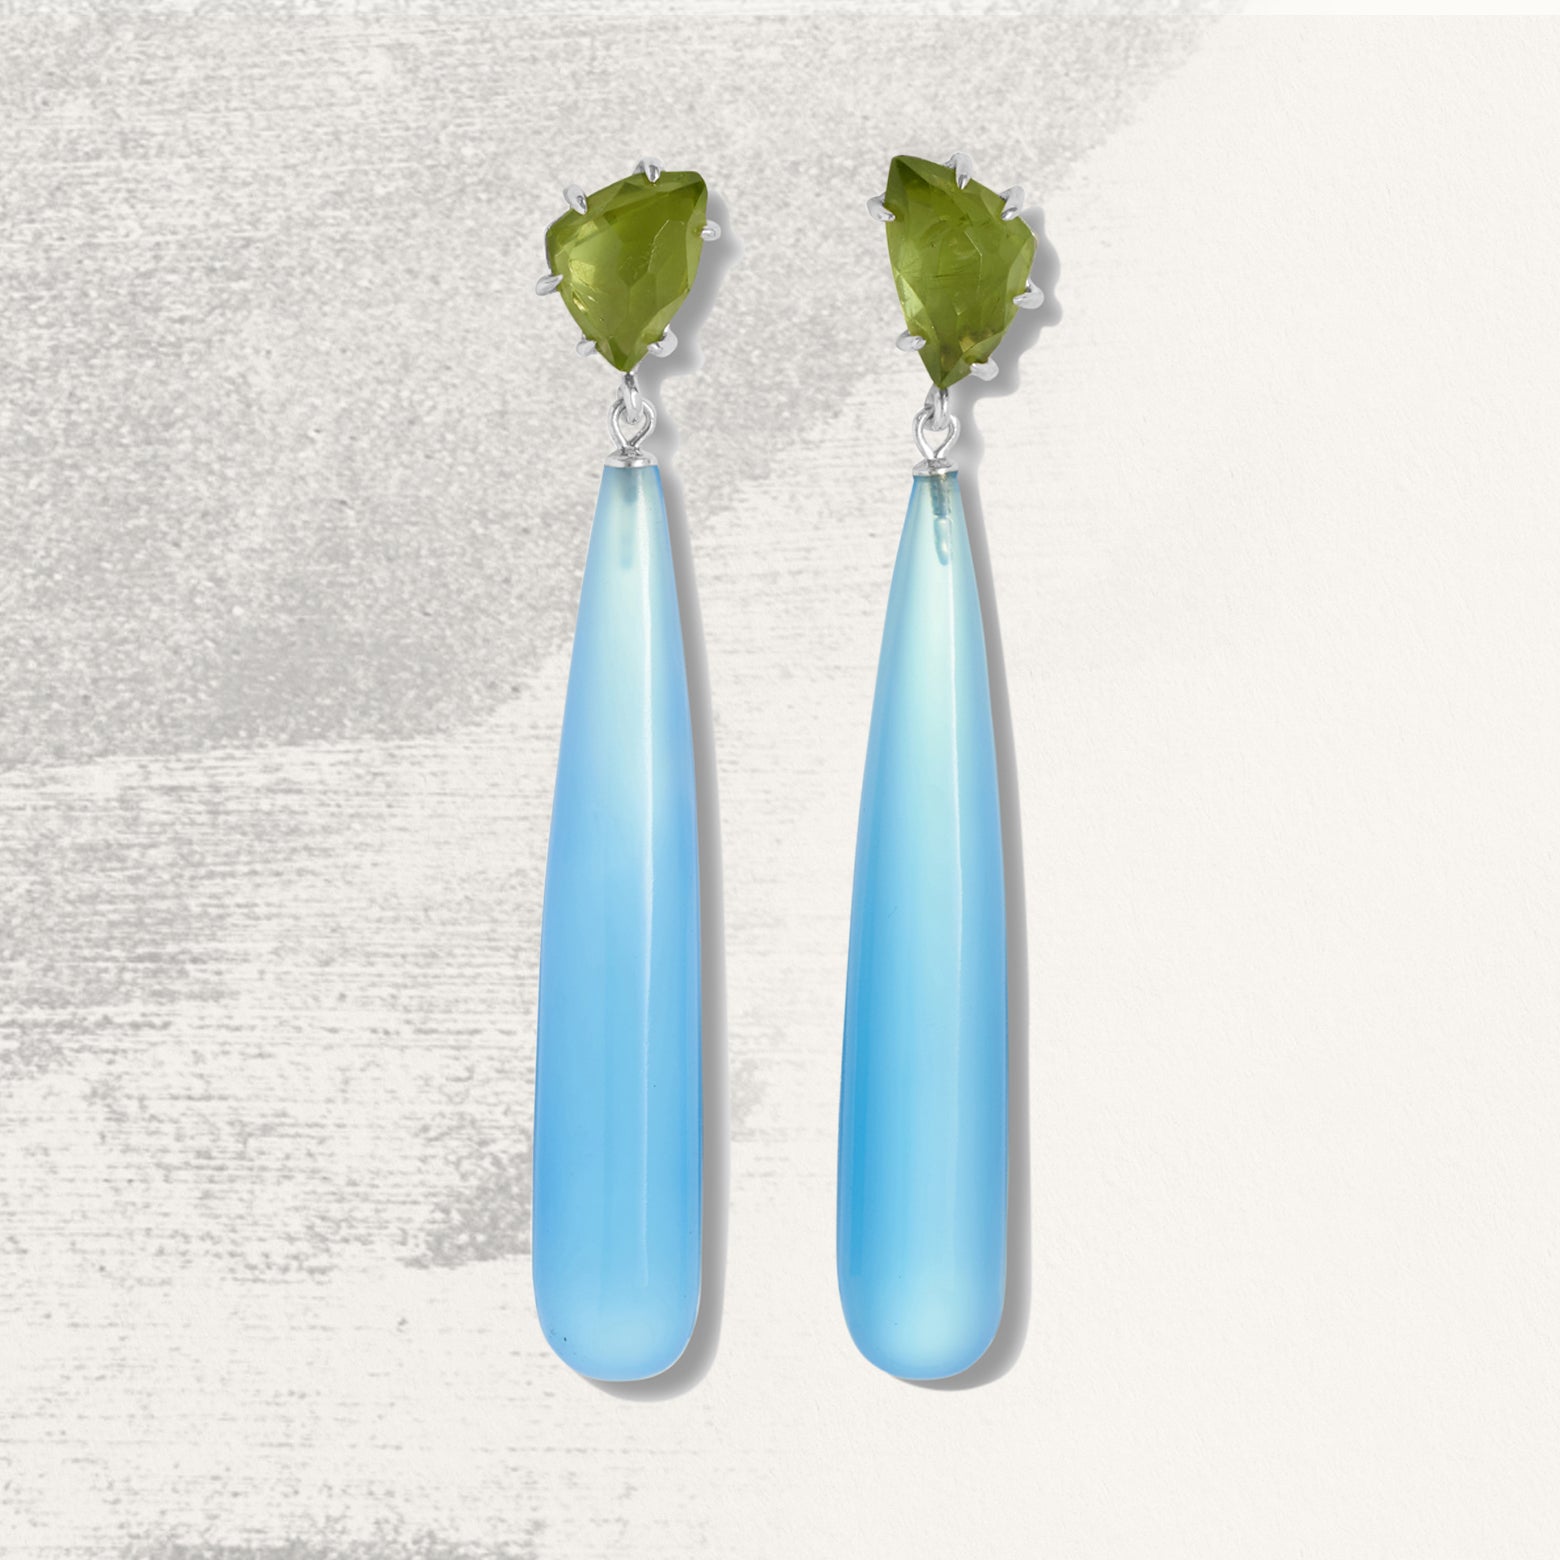 Earrings with green peridot above long blue chalcedony